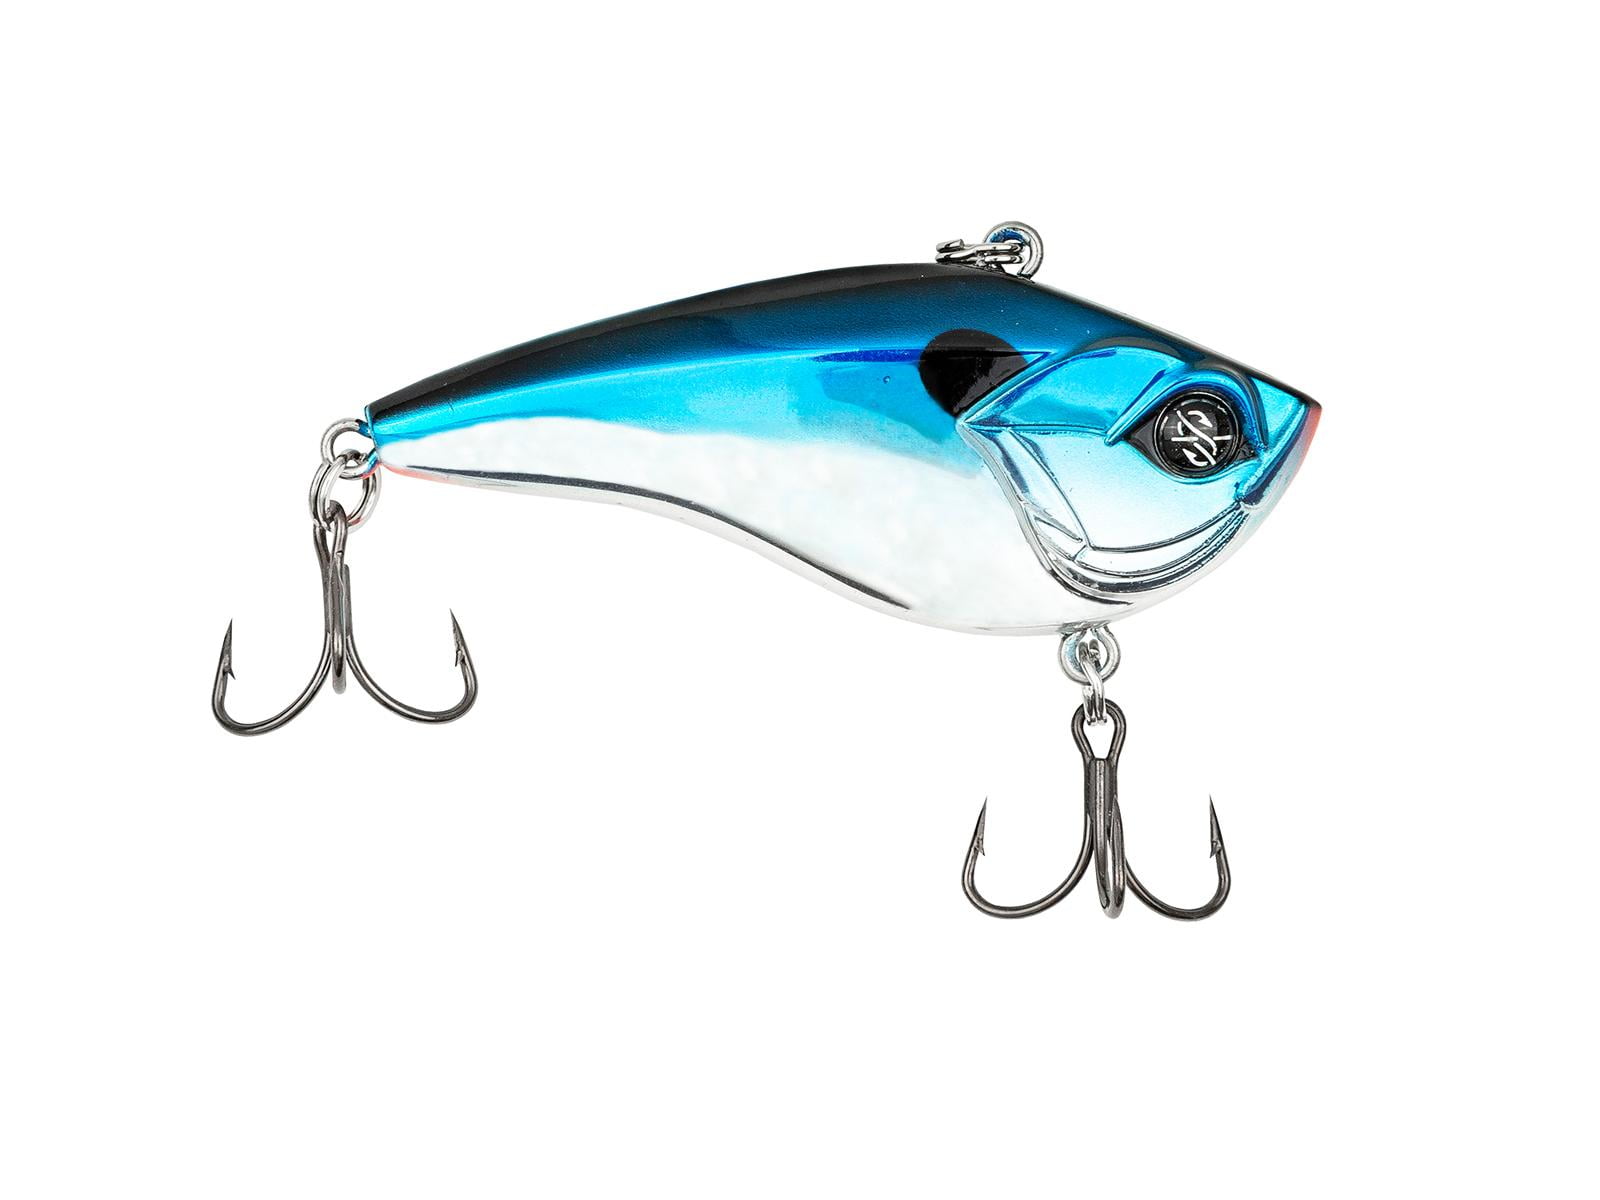  Arbogast Hula Popper Baits, Bull Frog, 2.25-Inch : Fishing  Topwater Lures And Crankbaits : Sports & Outdoors